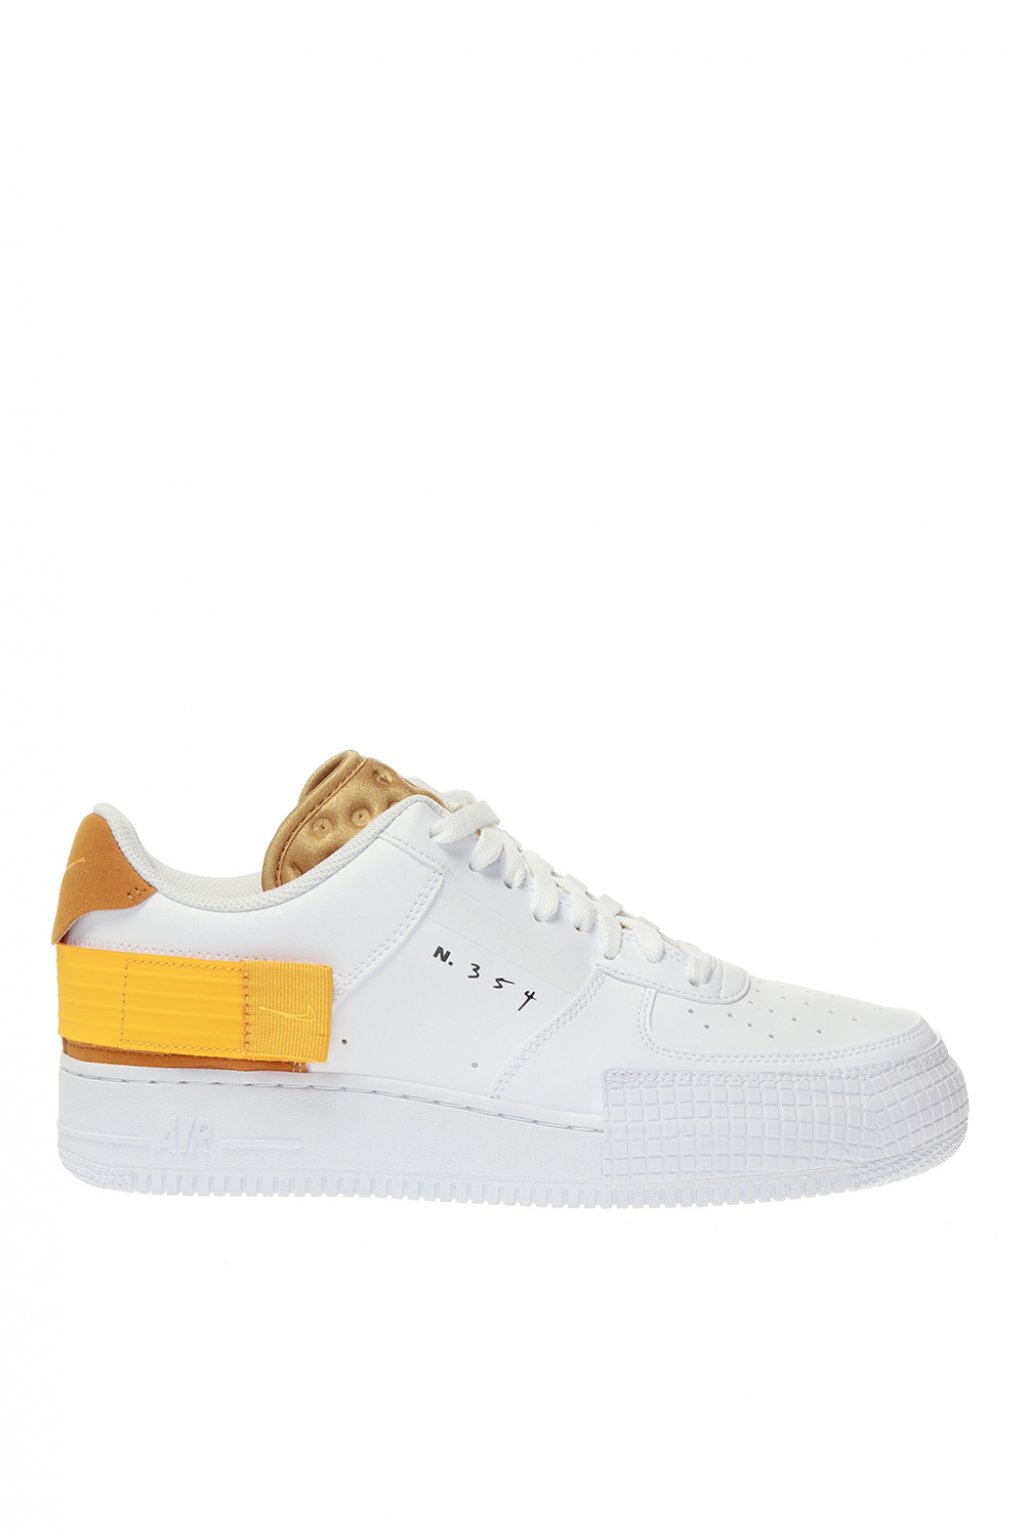 Nike Air Force 1 Type White/University Gold - AT7859-100